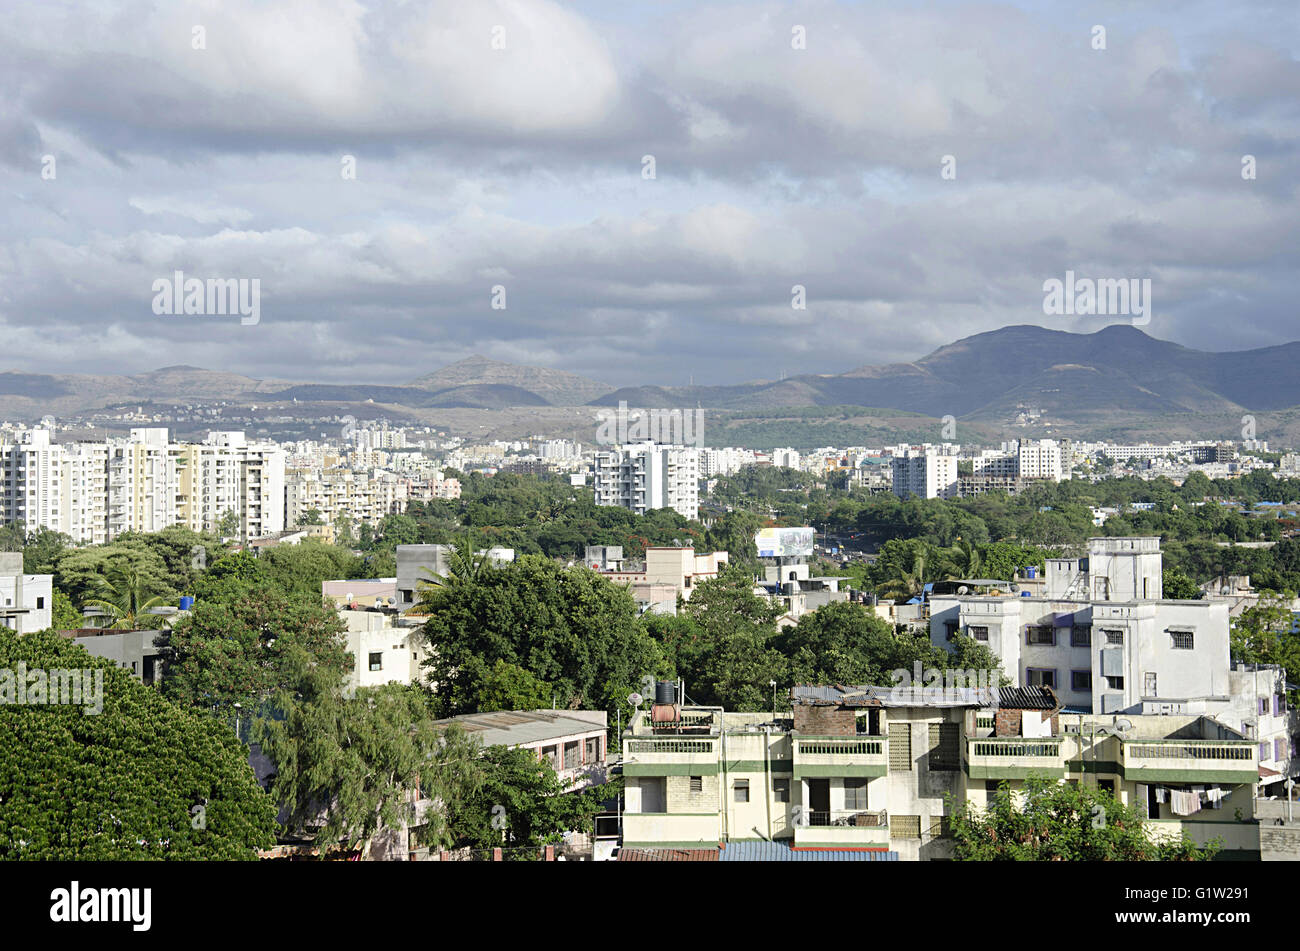 View of buildings and mountains, Cloudy sky, Warje, Pune, Maharashtra, India Stock Photo